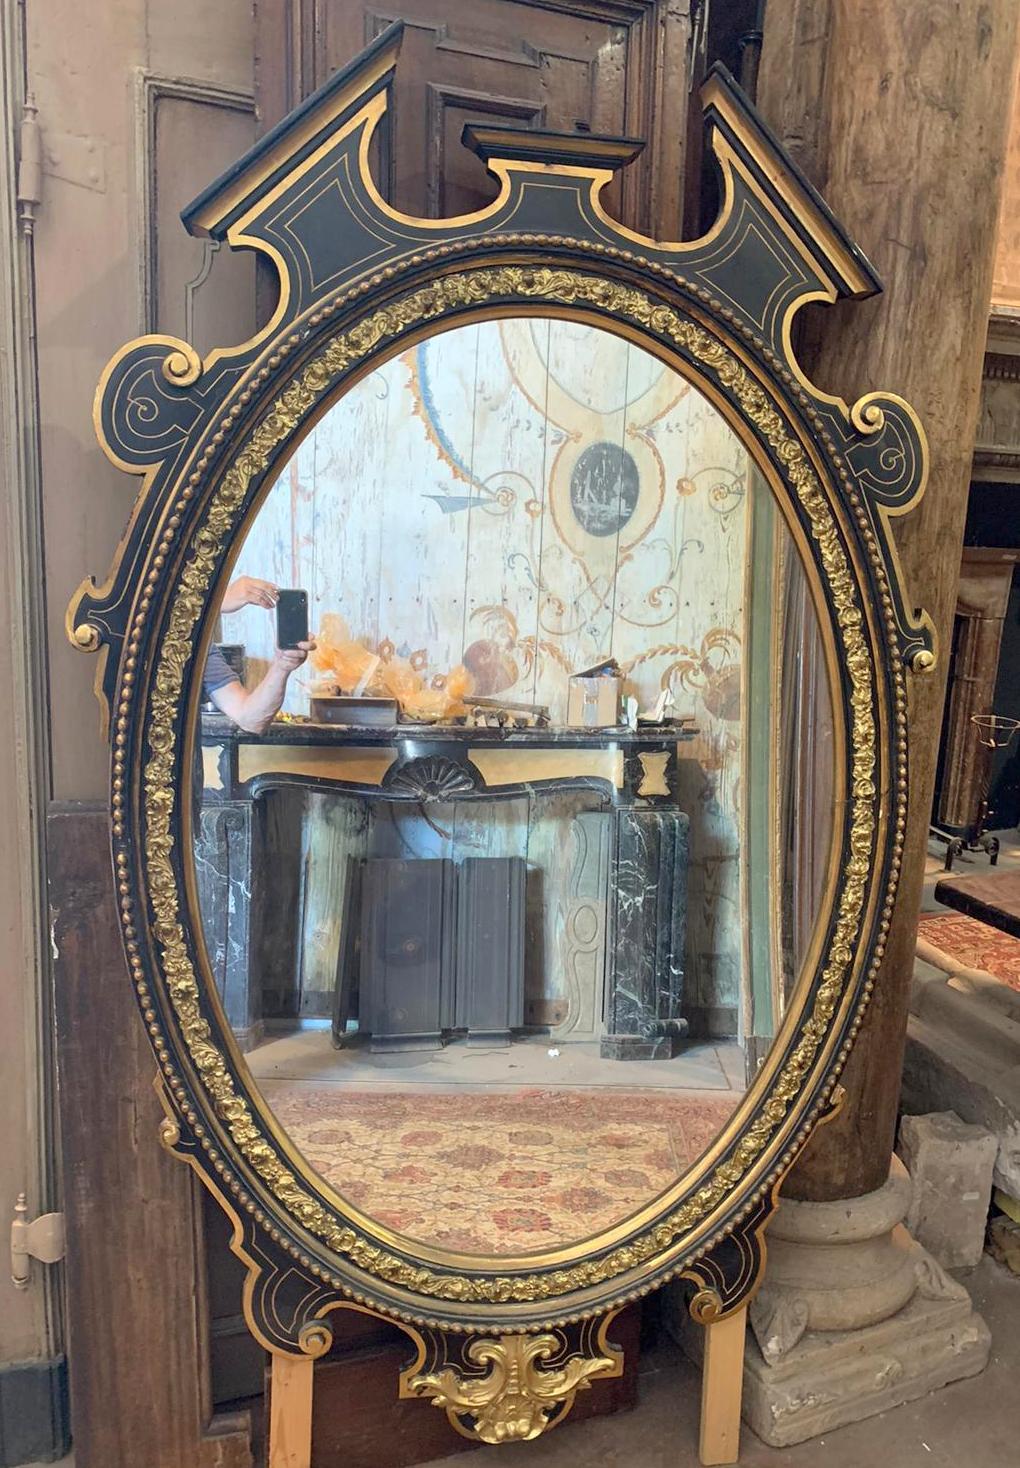 Vintage oval mirror, in black and gold lacquered wood, with carved frills and particular shape, built in the late 19th century in Italy.
Originally it was placed above a fireplace in a room with high ceilings, but currently it can be installed in